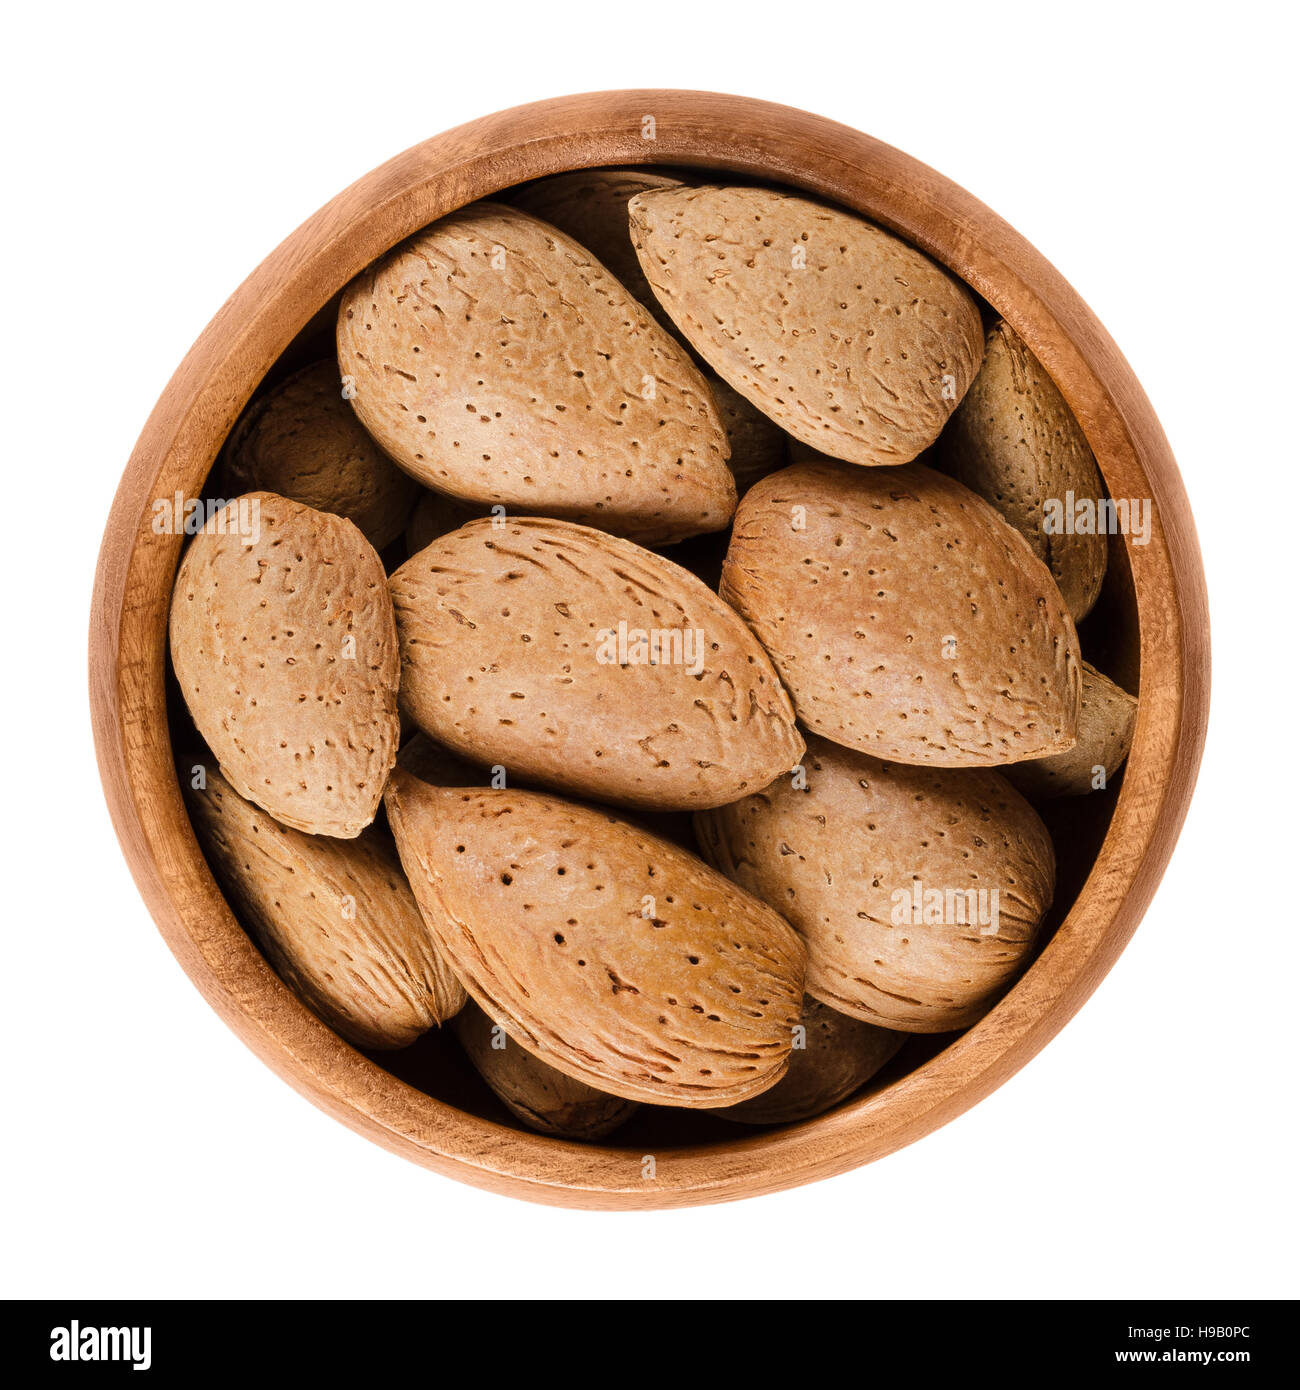 Almonds in shell in a wooden bowl on white background. The raw edible almond seeds are no nuts.Botanically they are drupes. Stock Photo